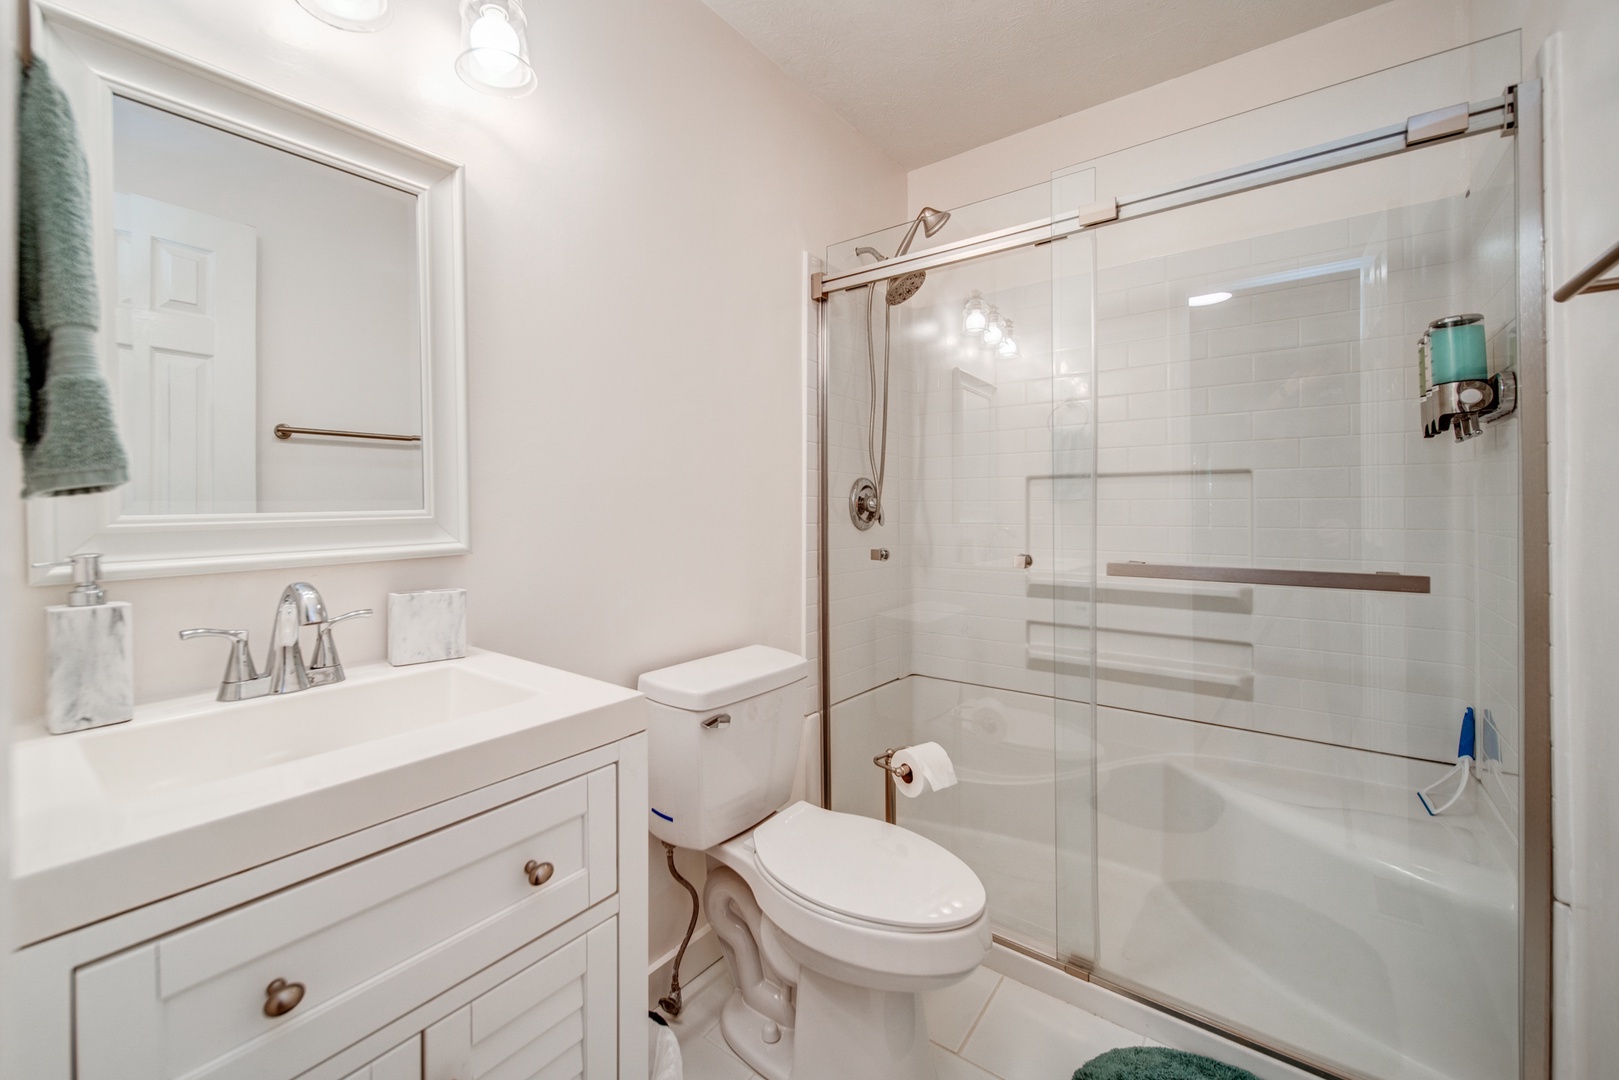 This main-level full bathroom includes a single vanity & glass shower